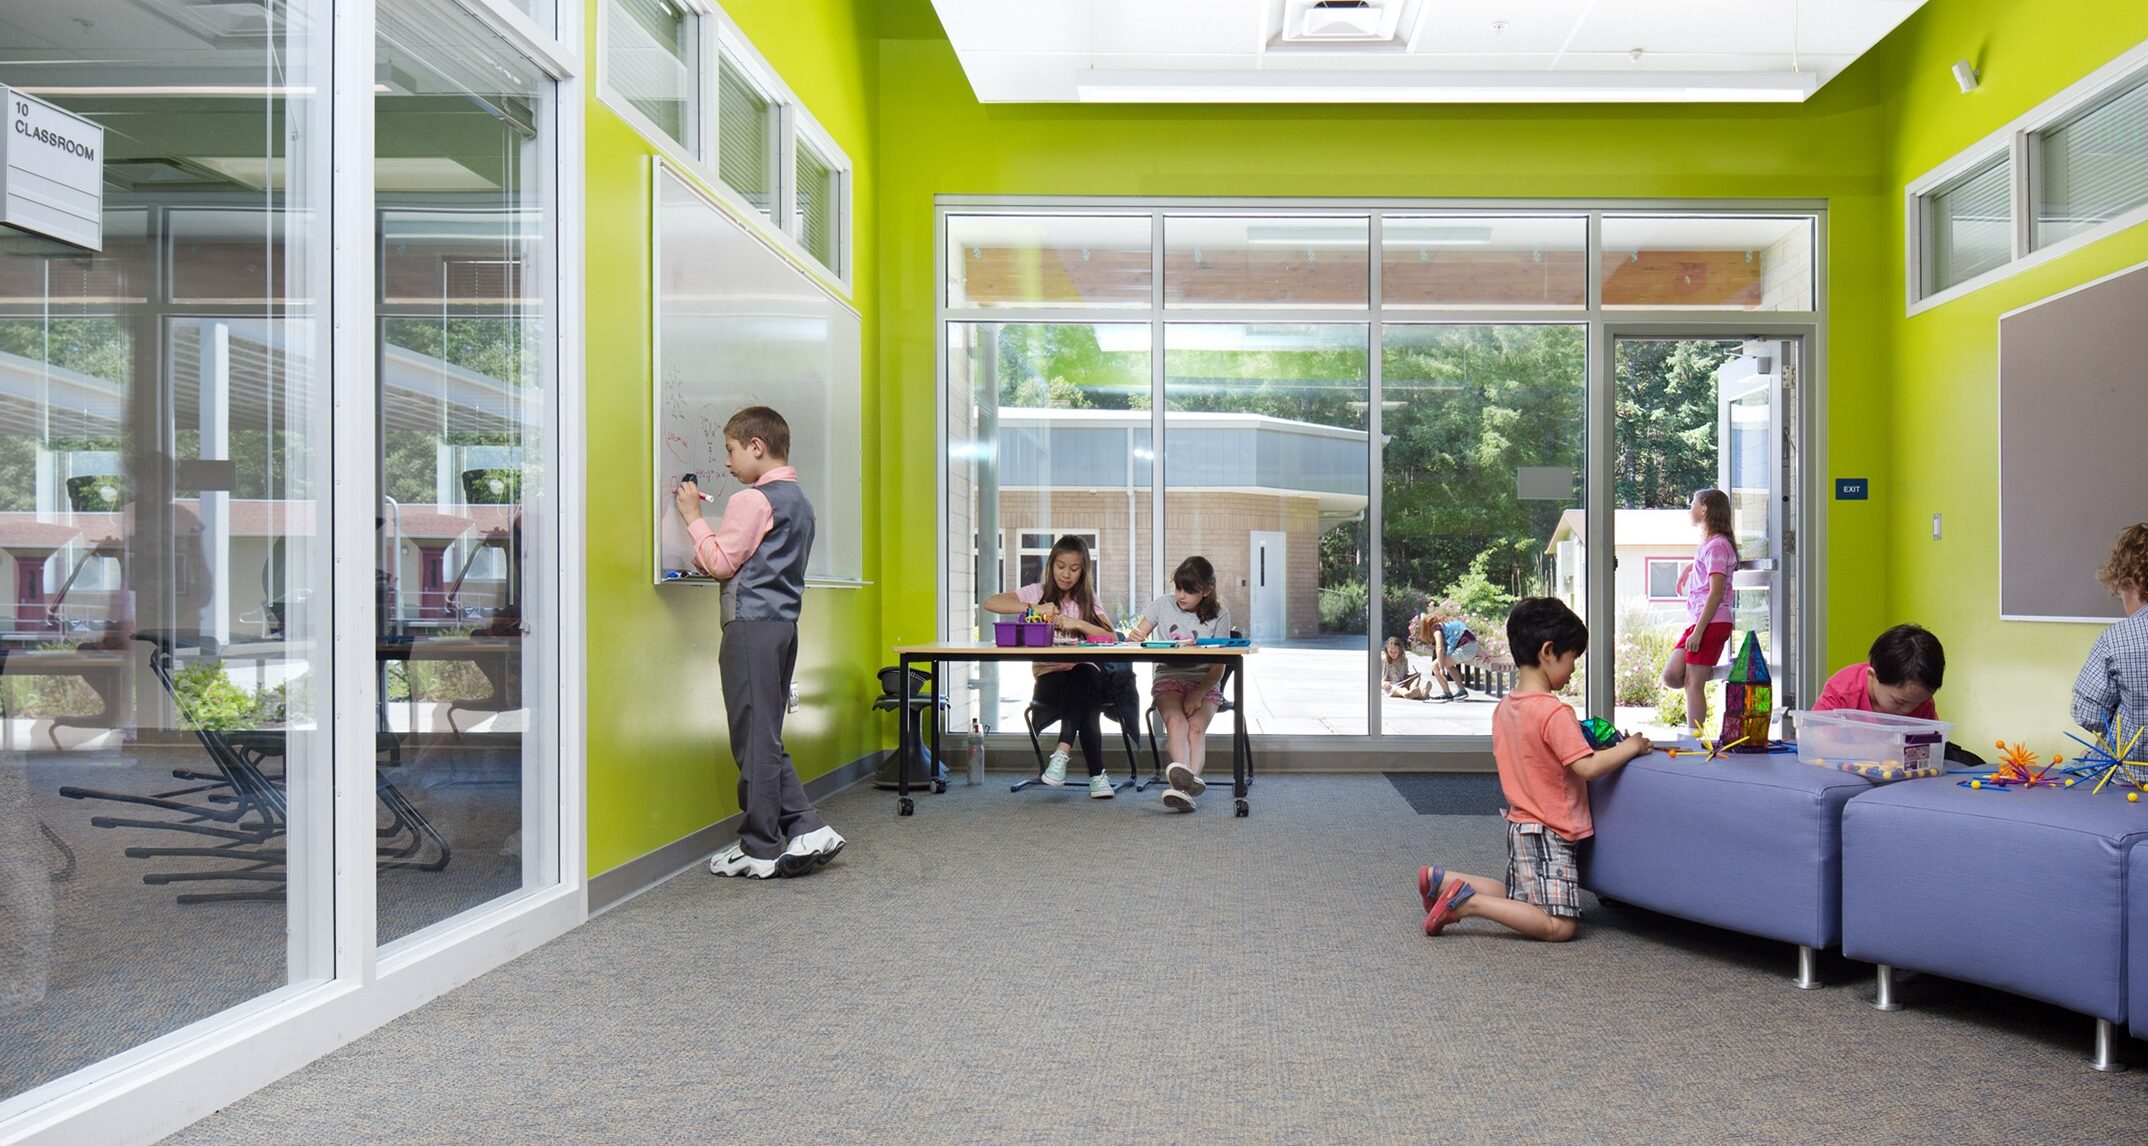 By understanding what students desire, we can design spaces that will support and stimulate them in the ways that they need to excel. Grapeview K-8 School - NAC Architecture